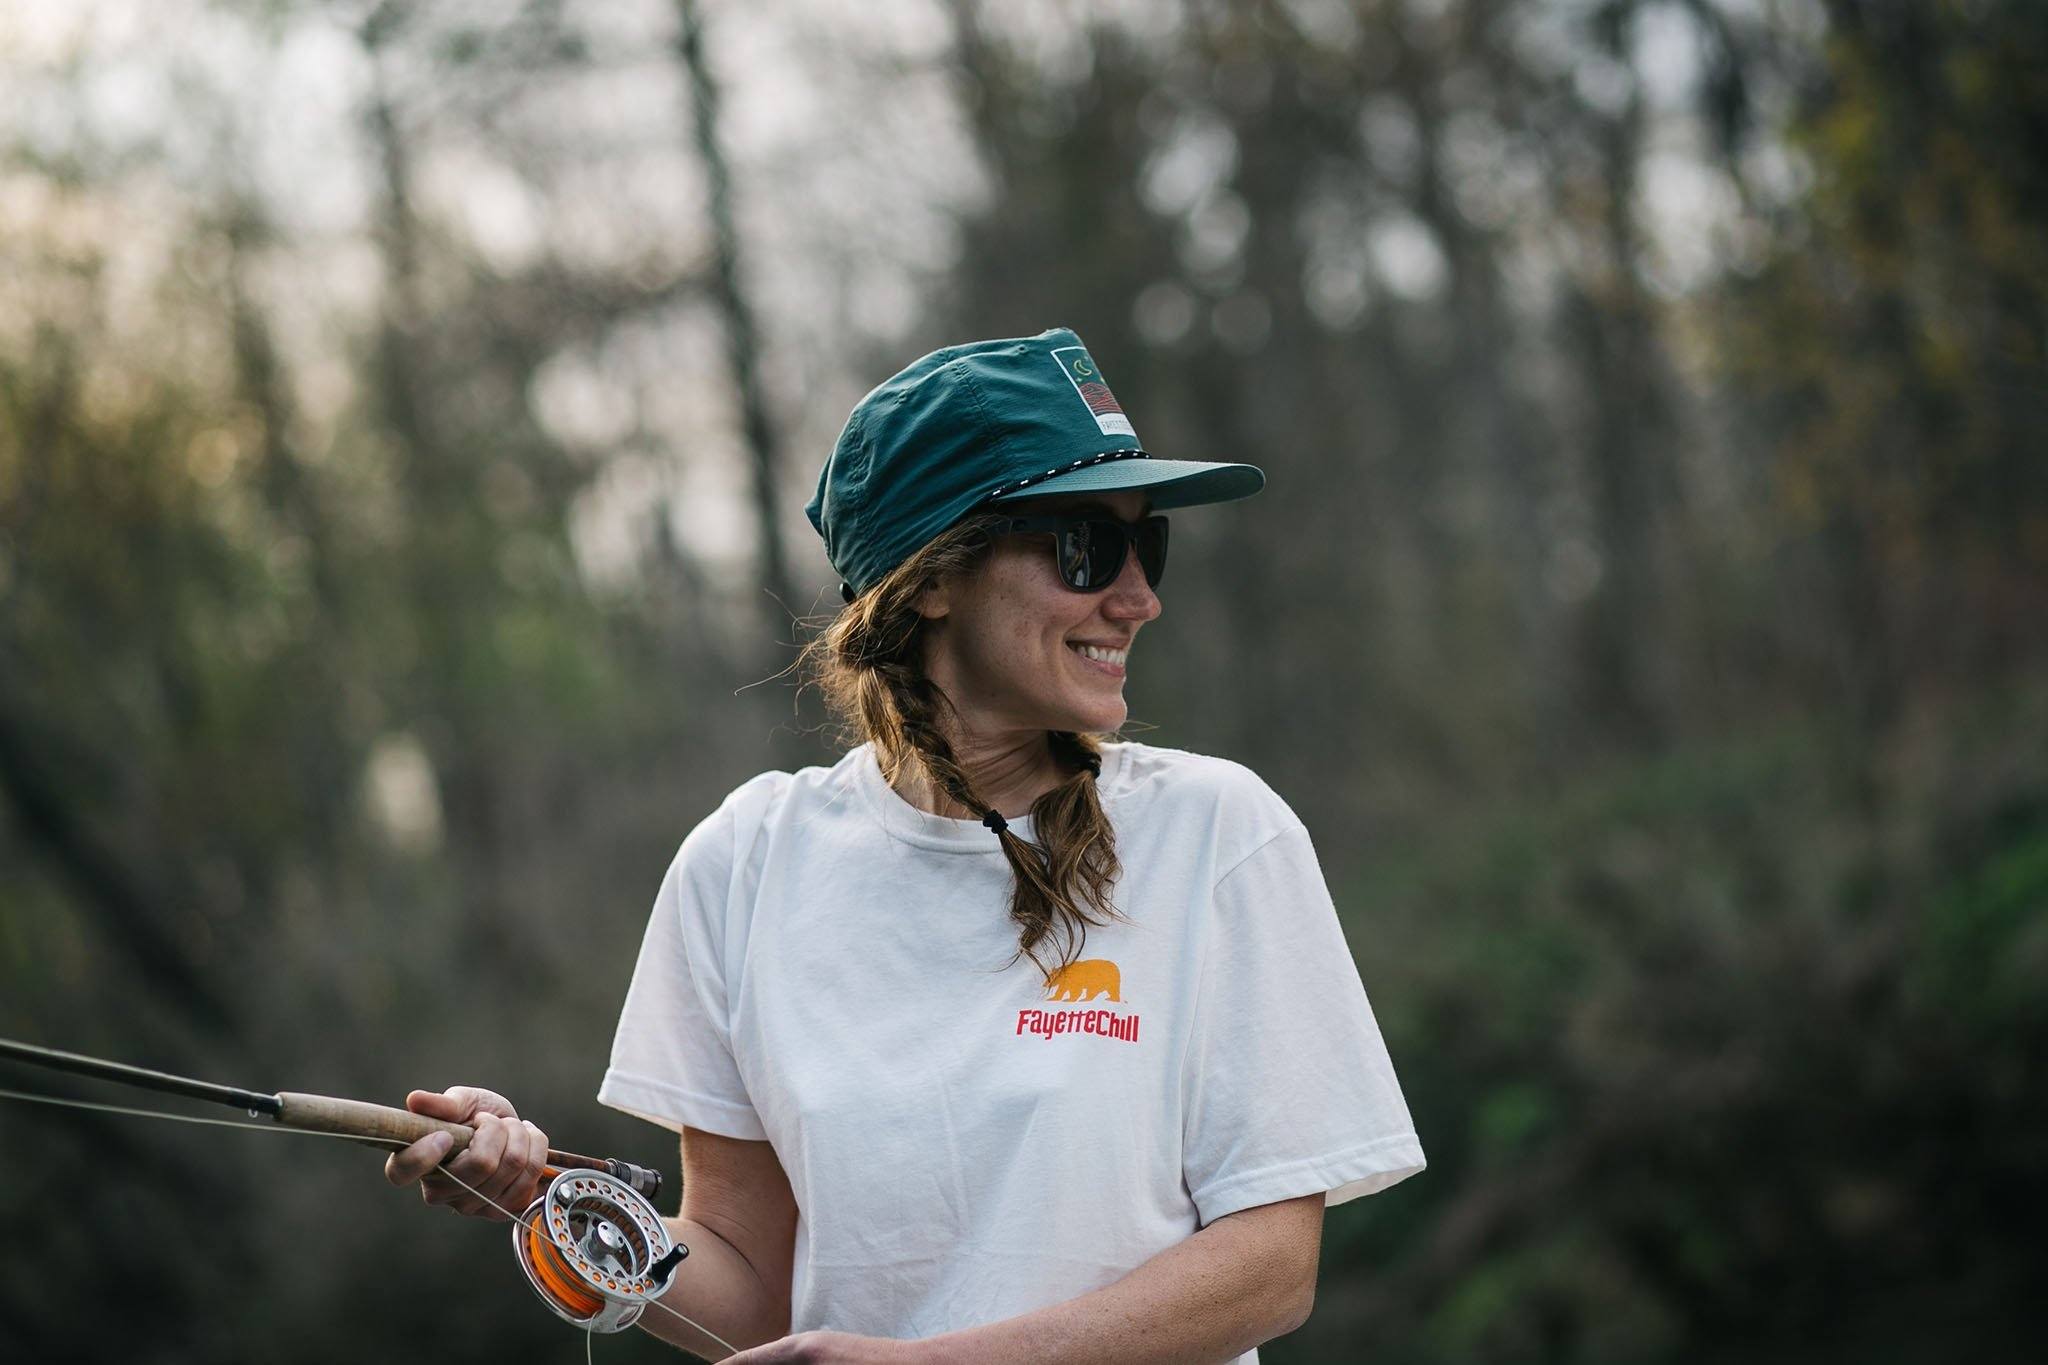 Fly Fishing and Female: Putting #5050ontheWater into Practice – Fayettechill